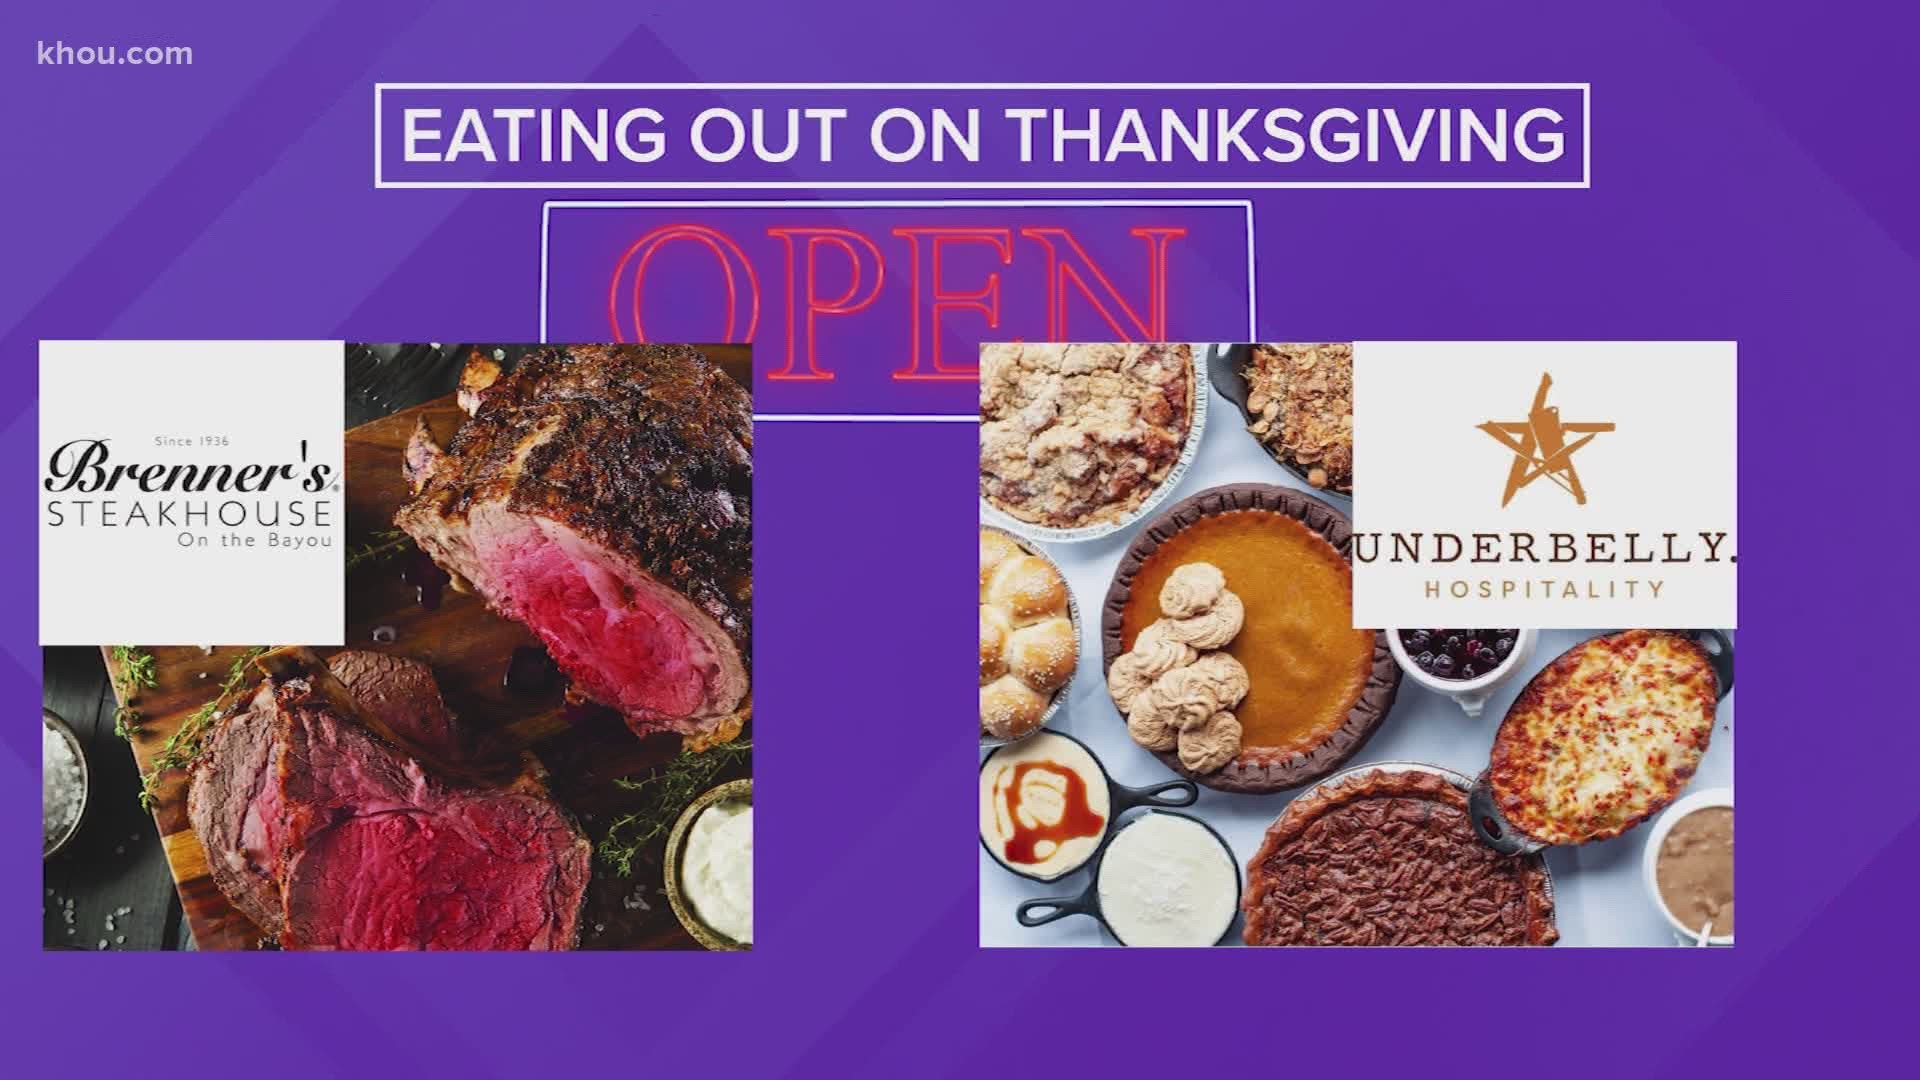 If you want to eat out on Thanksgiving Day, you have some local eateries and chain restaurants to choose from.